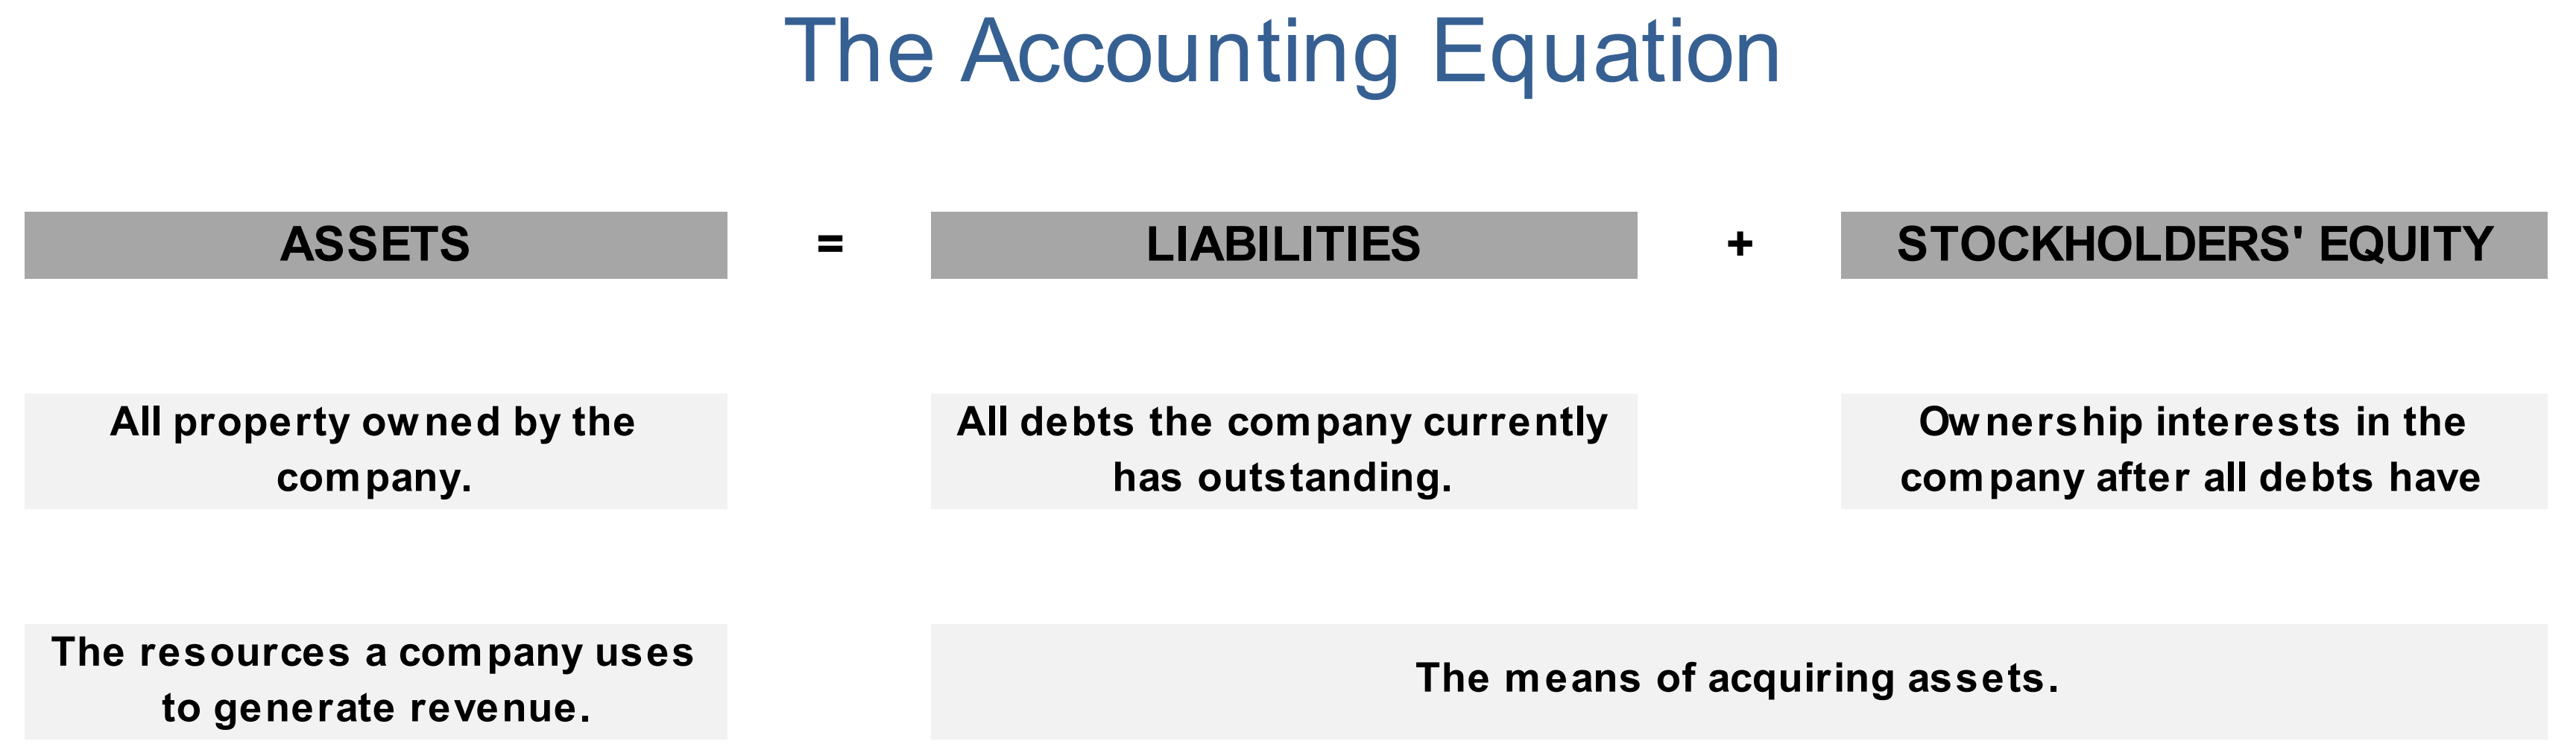 The Accounting Equation Definitions